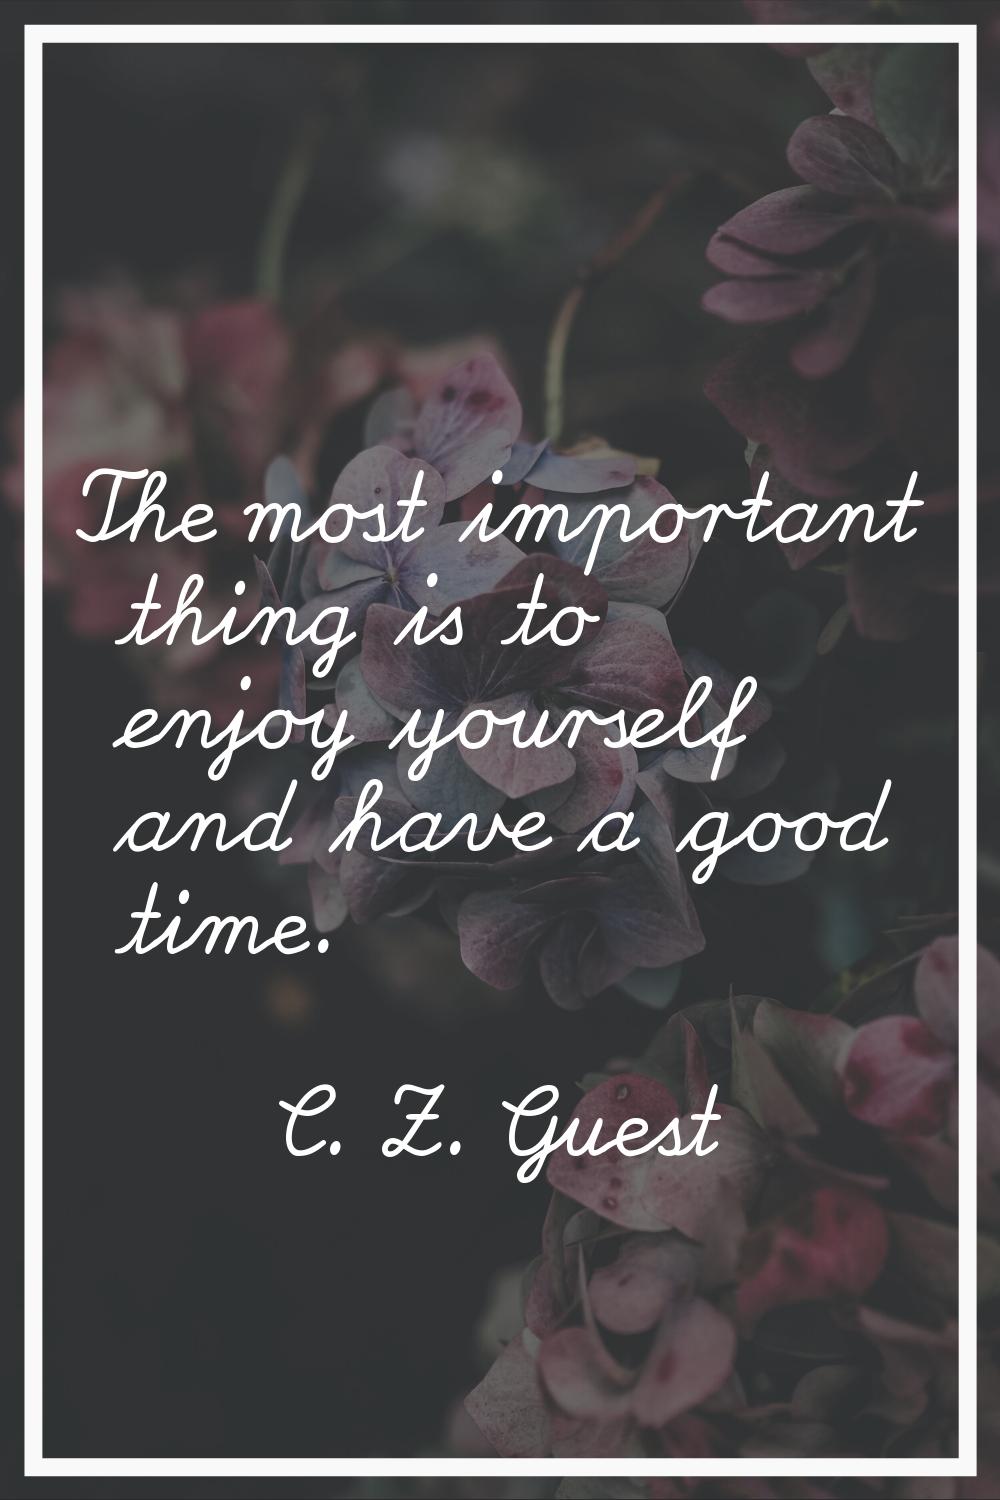 The most important thing is to enjoy yourself and have a good time.